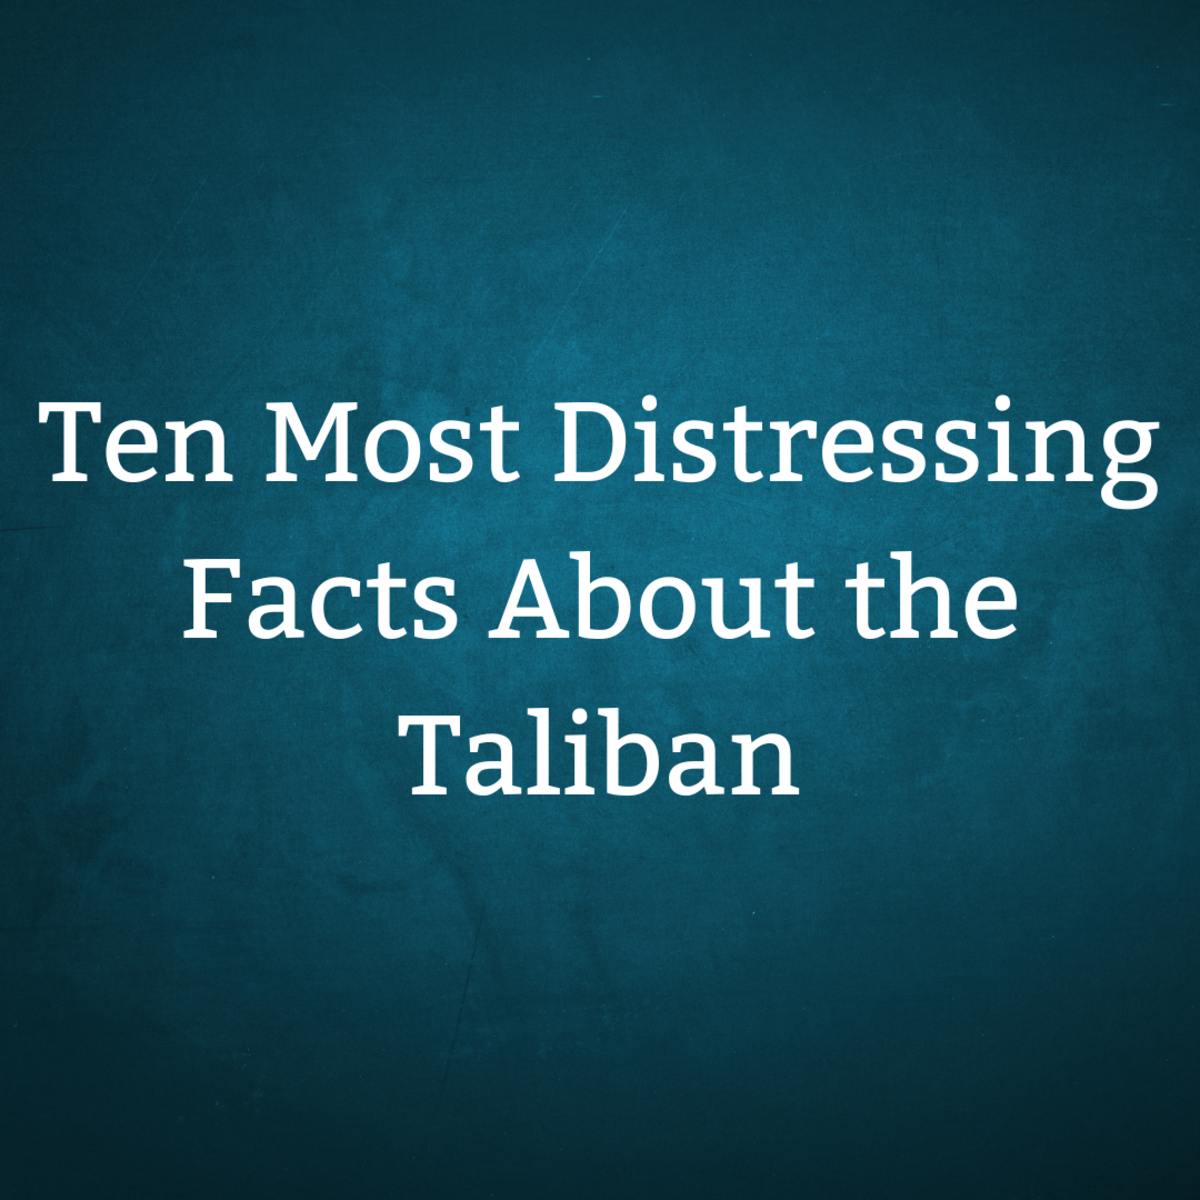 Ten Most Distressing Facts About the Taliban